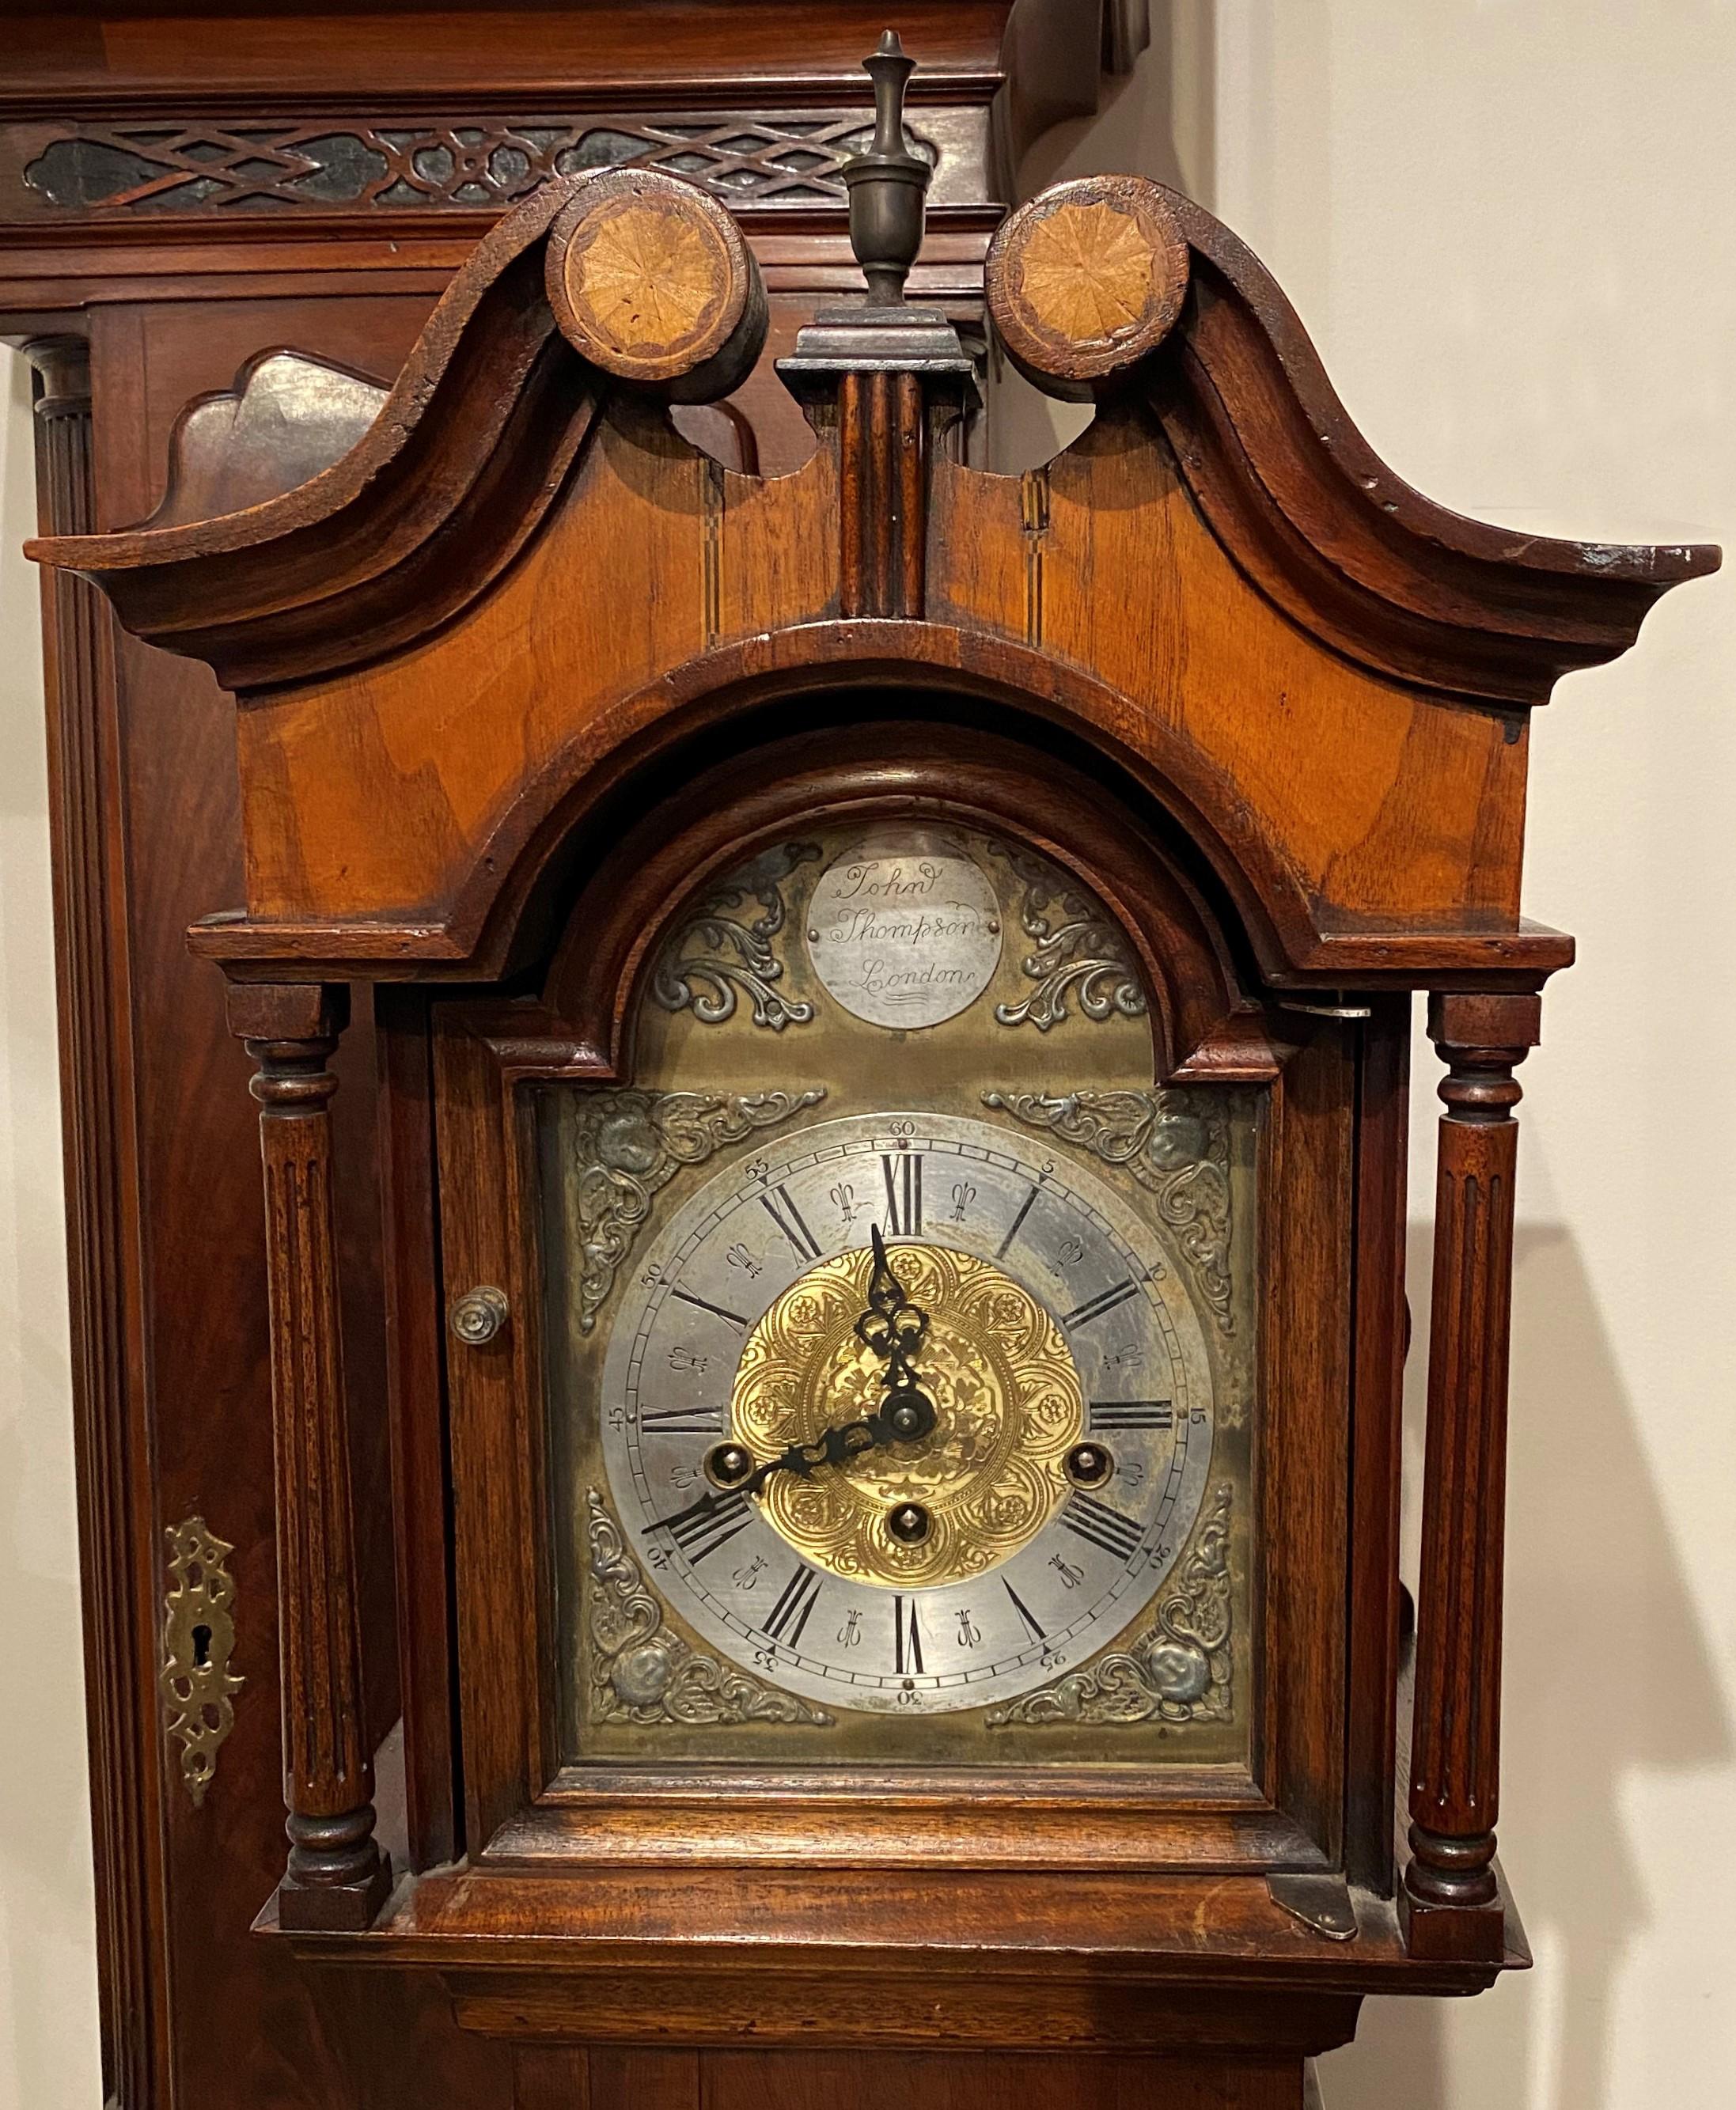 A fine example of a carved walnut & mahogany diminutive grandmother tall clock with a swan’s neck split pediment with inlaid full fan rosettes and a center urn finial surmounting a arch form glass door, opening to a brass arched Roman numeral dial